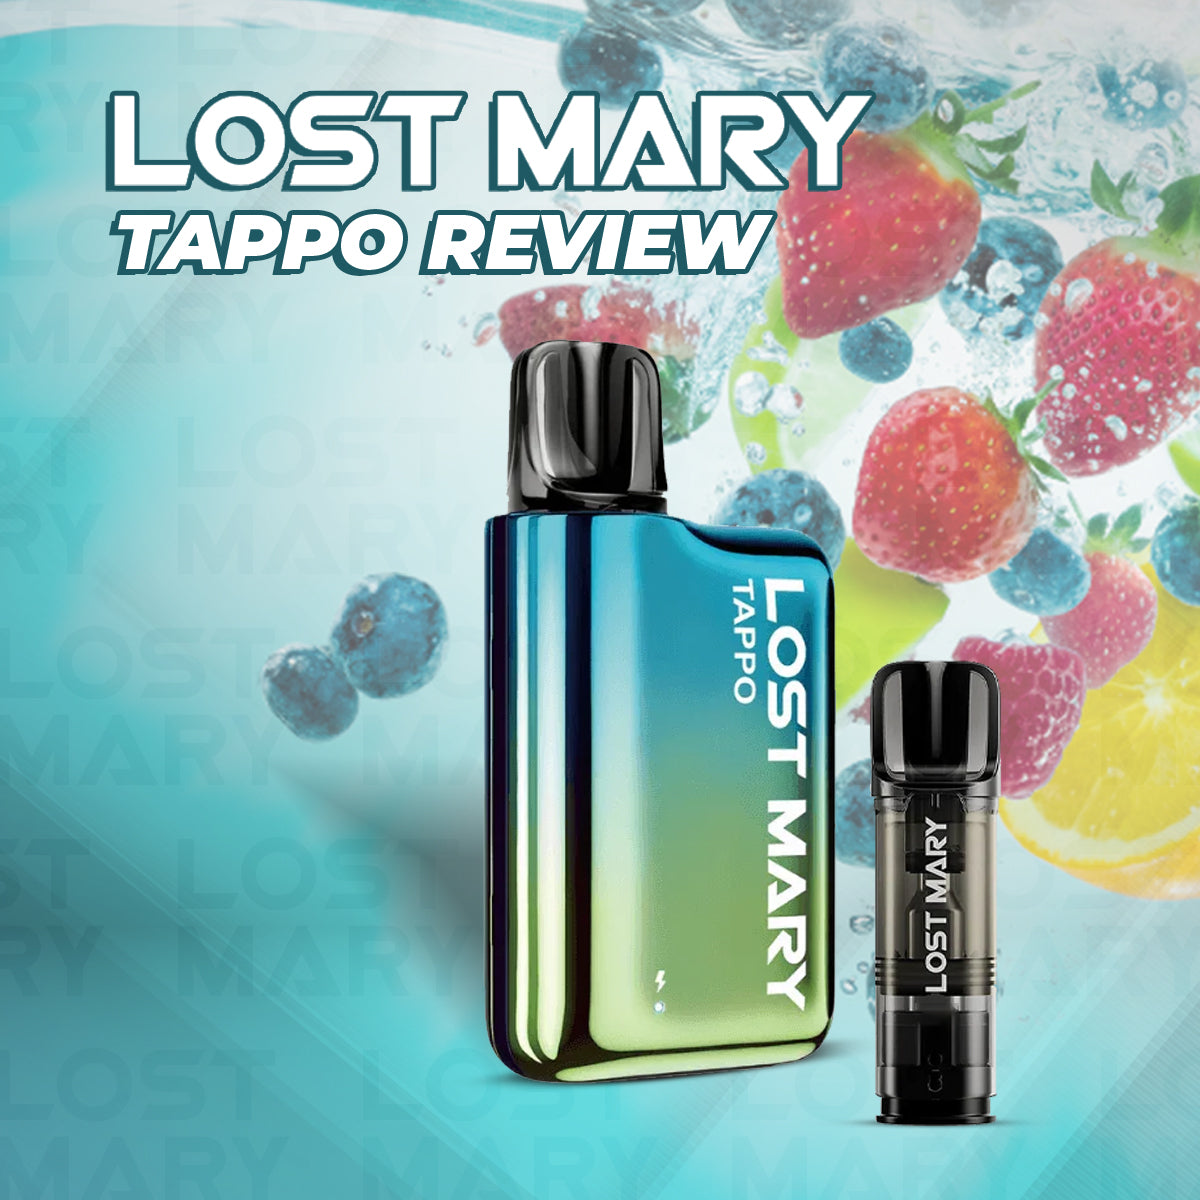 Lost Mary Tappo Flavours: A Complete List